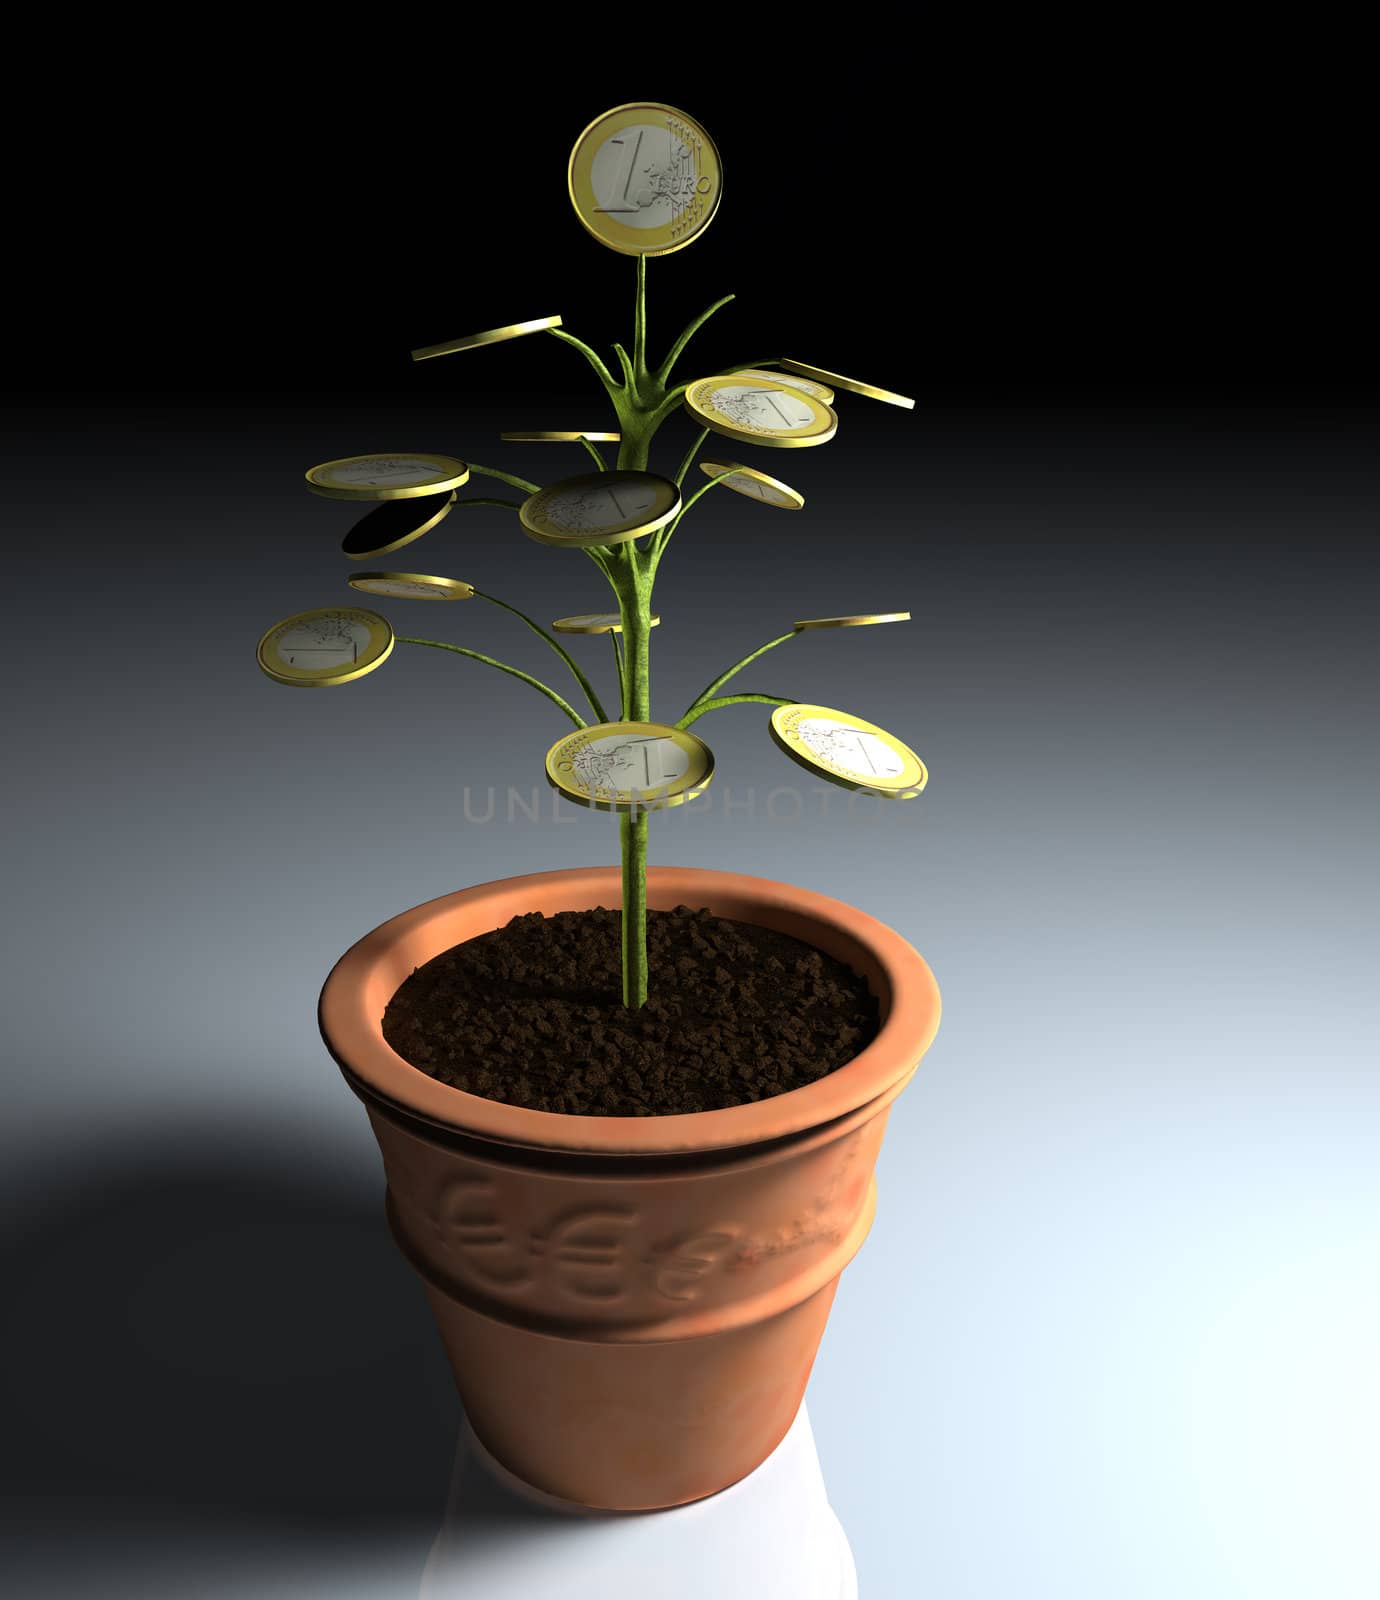 A little tree with one euro coin instead of leaves, planted in a vase, is illuminated by a dim light coming from the right side